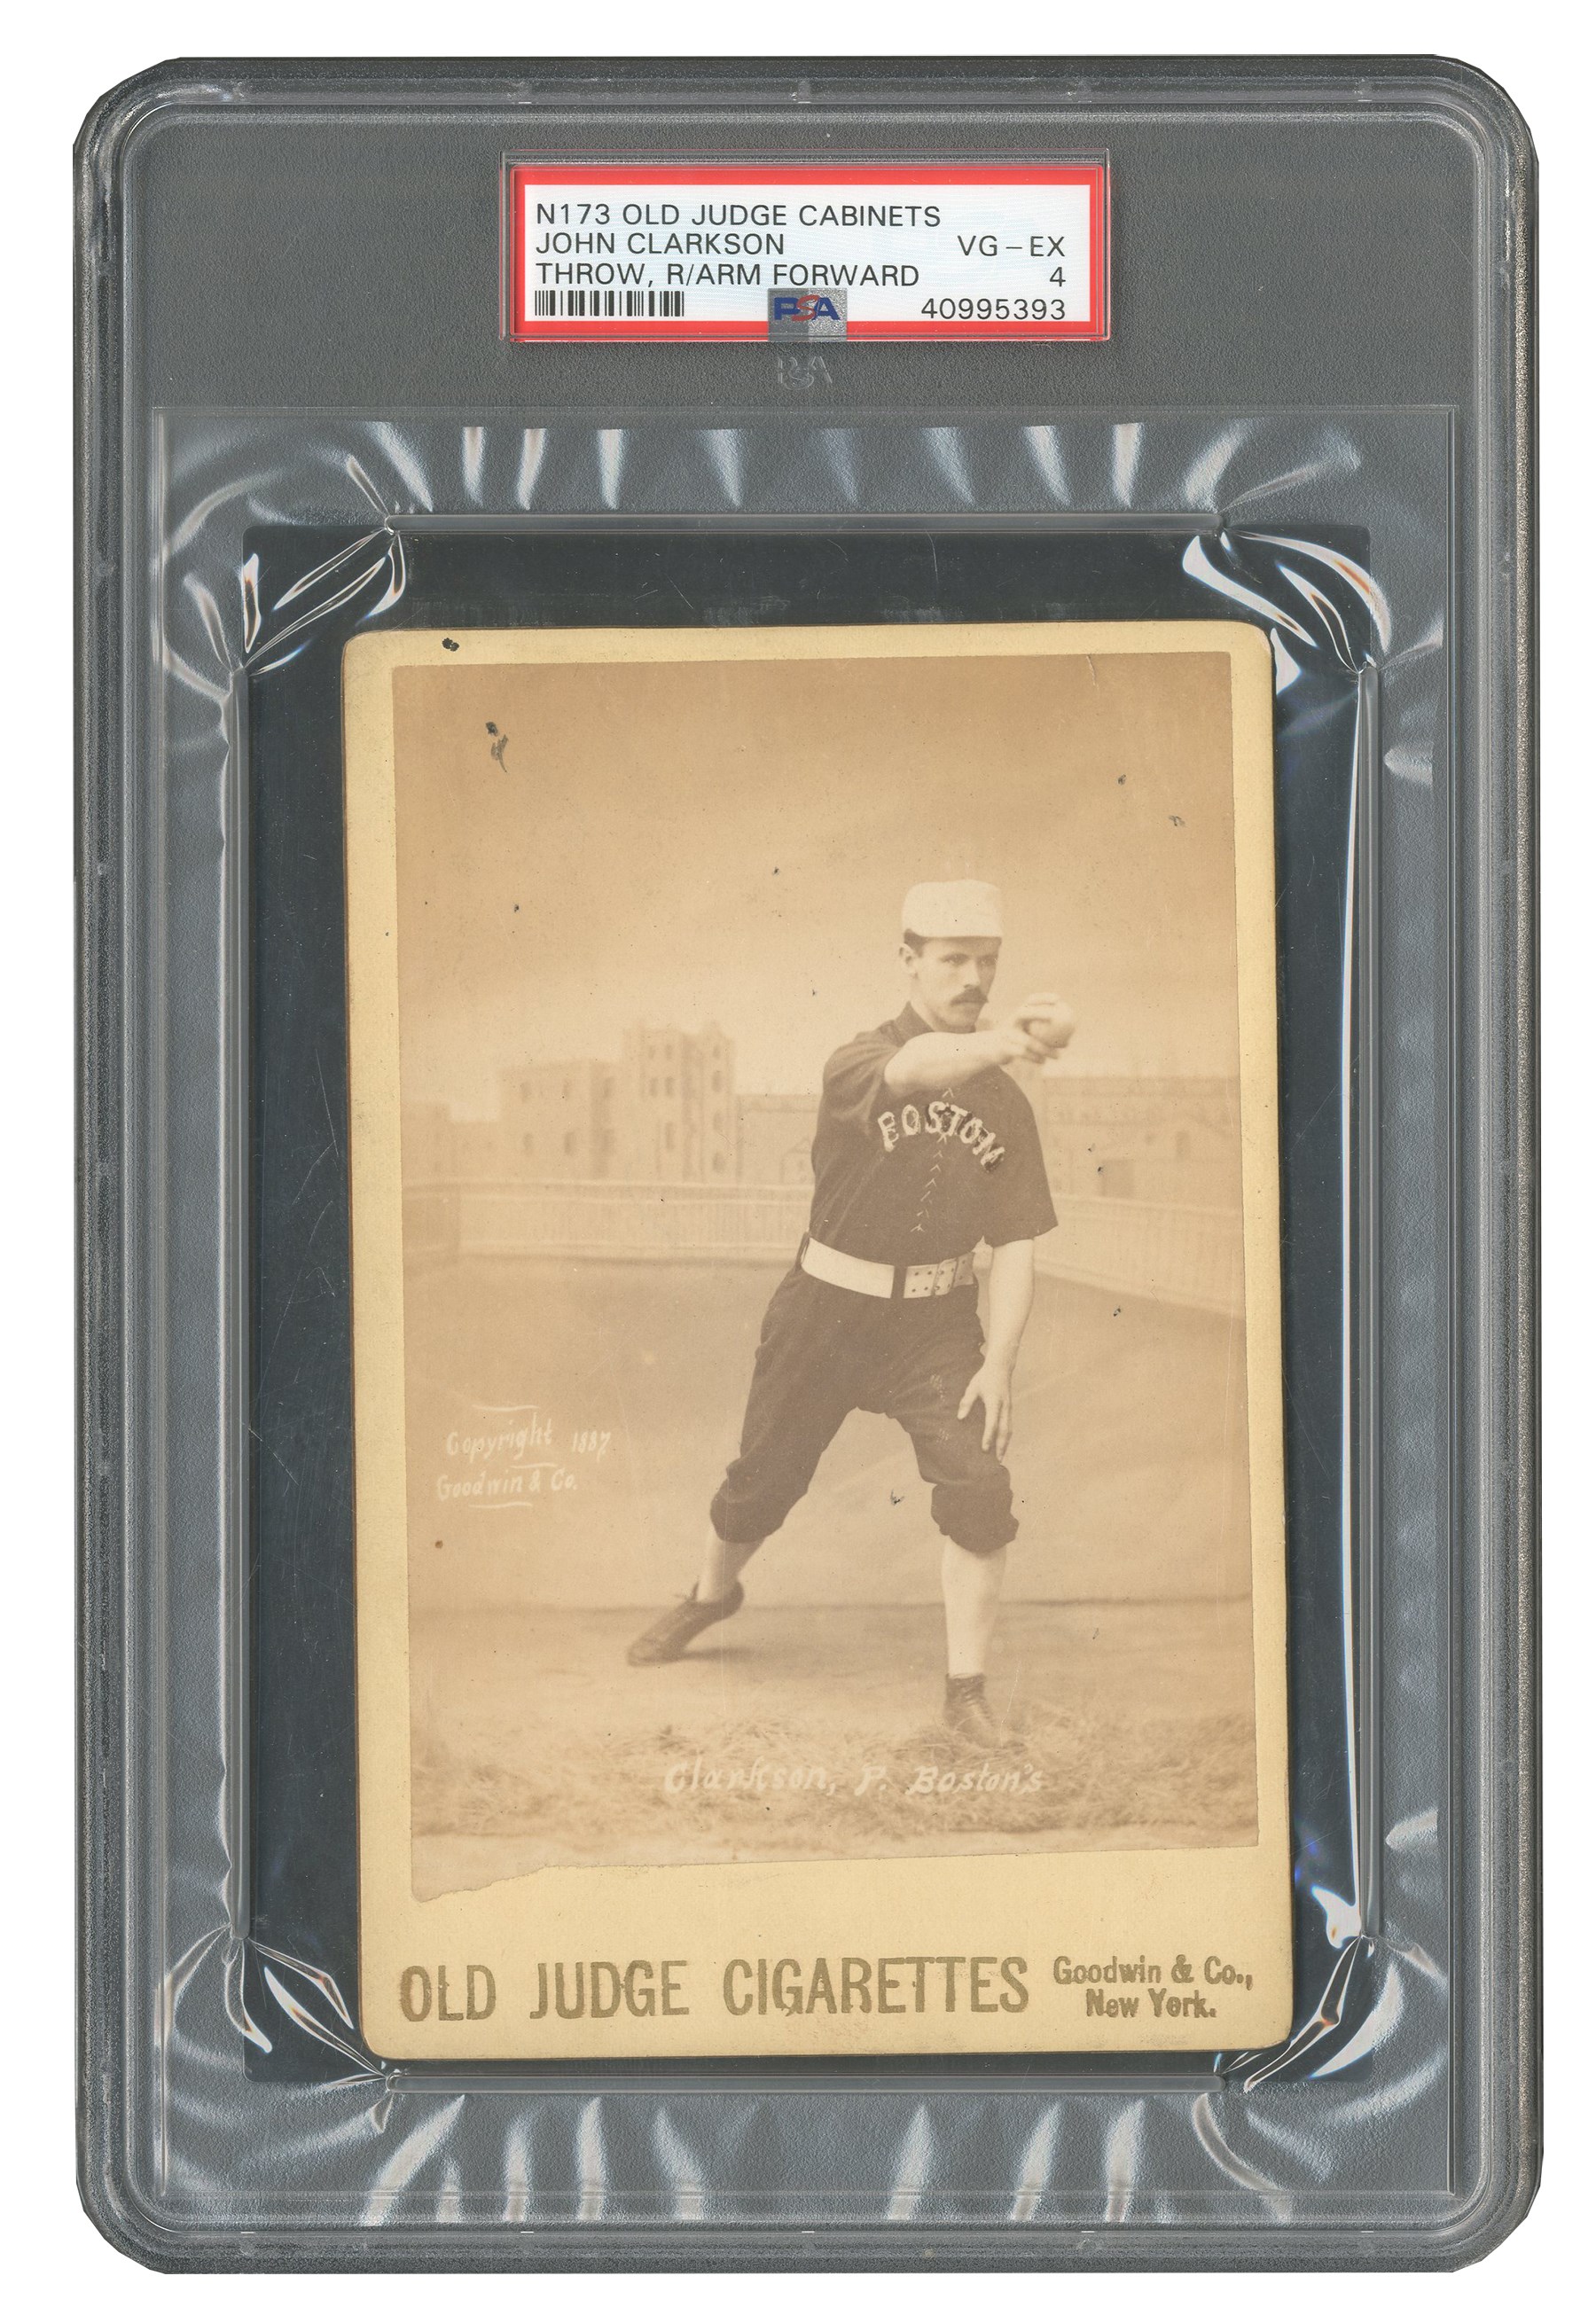 Baseball and Trading Cards - 1888 N173 John Clarkson Old Judge Cabinet (PSA VG-EX 4)